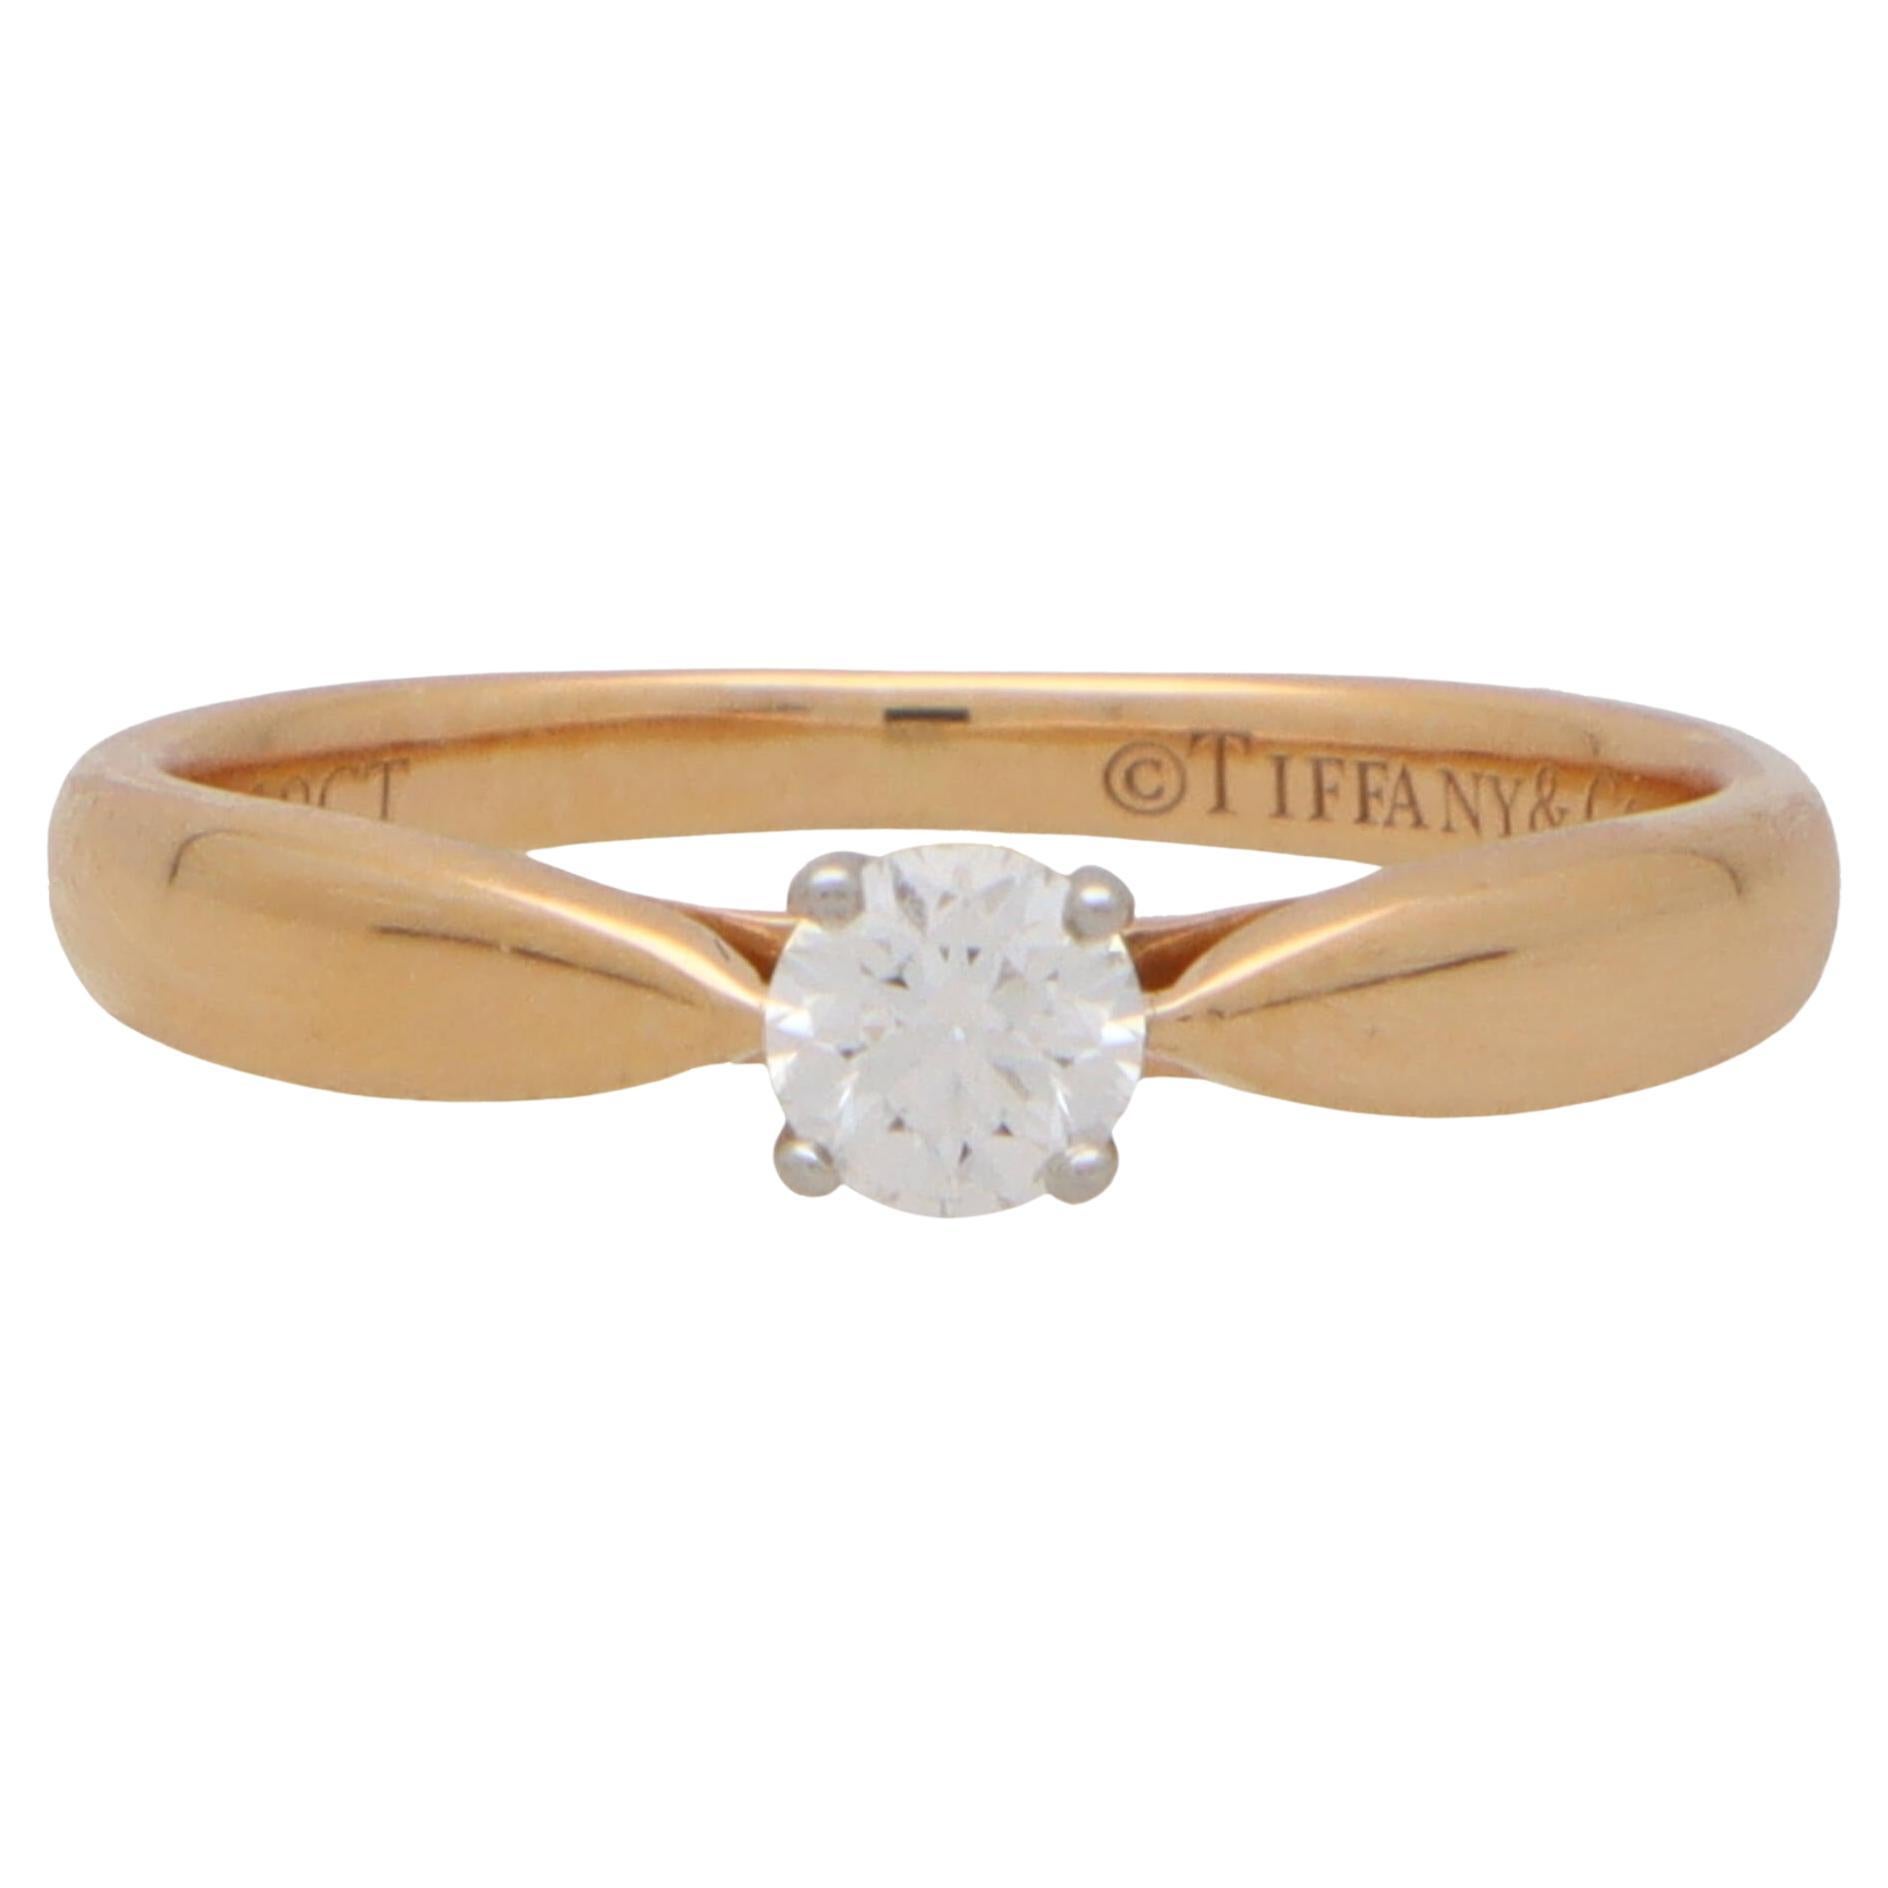 Vintage Tiffany & Co. Harmony Diamond Ring in Rose Gold and Platinum